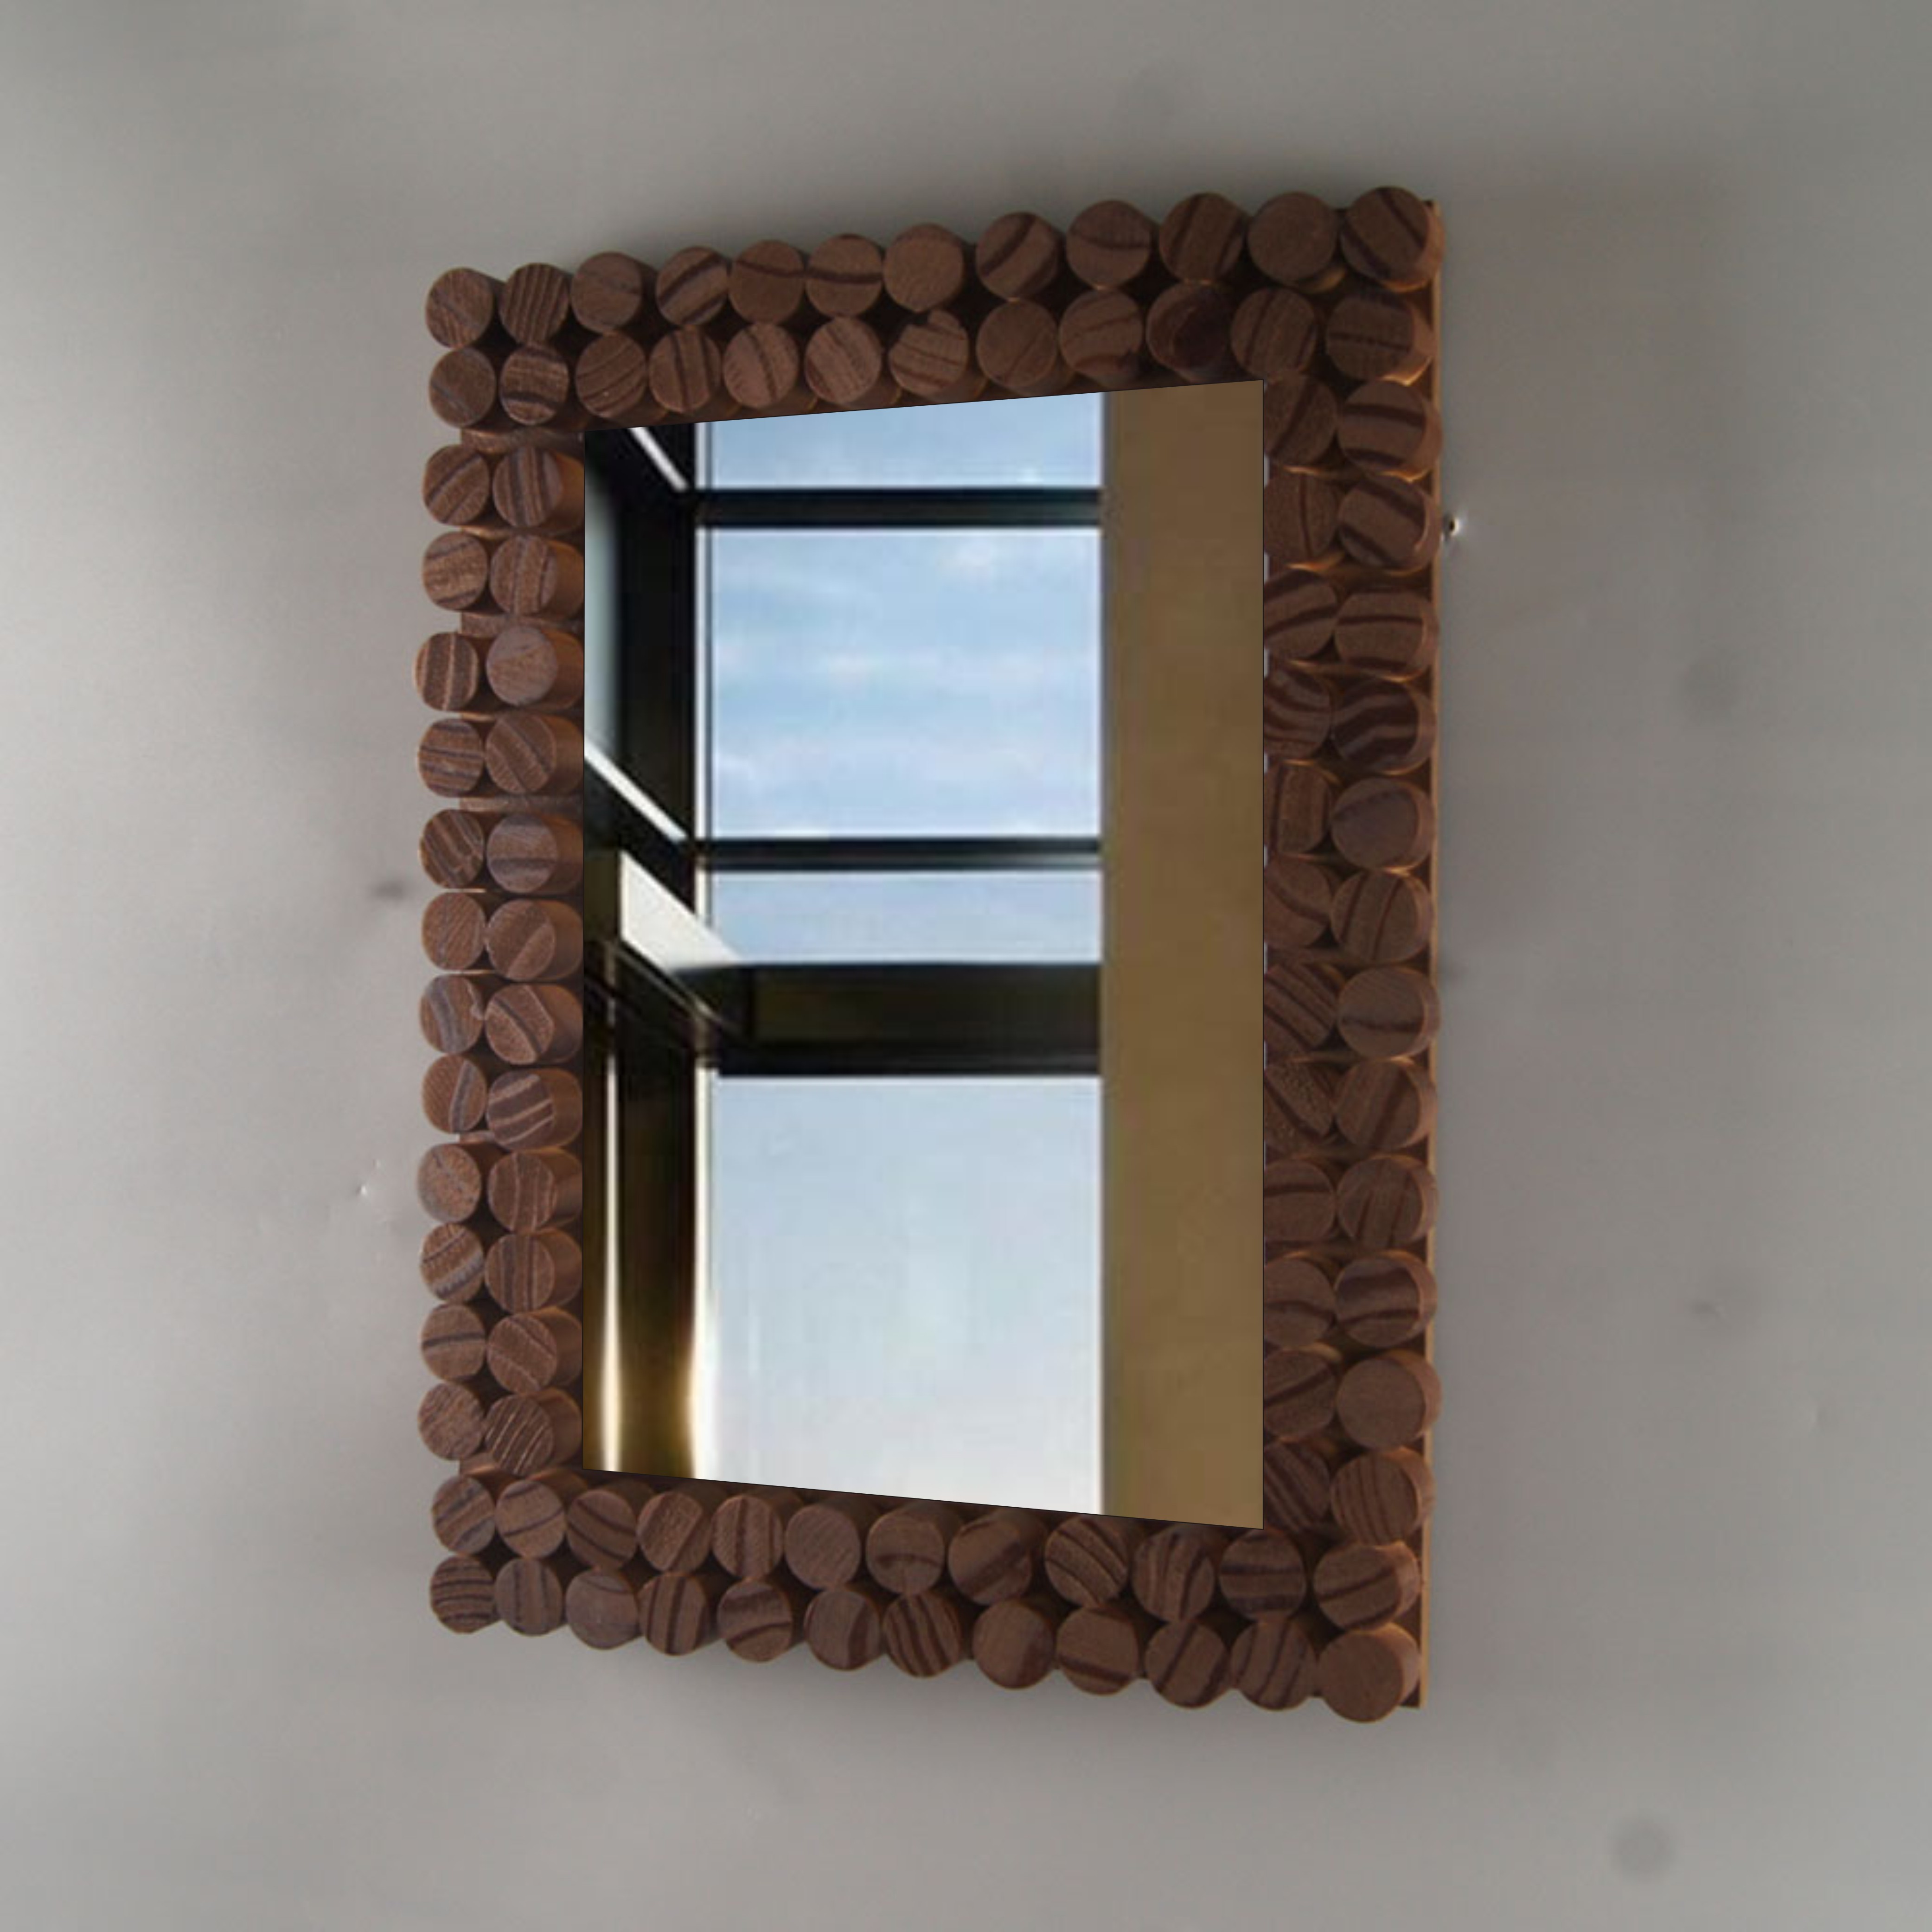 Wood Frame Accent Mirror, Rustic Farmhouse Style Decorative Wall Mirror